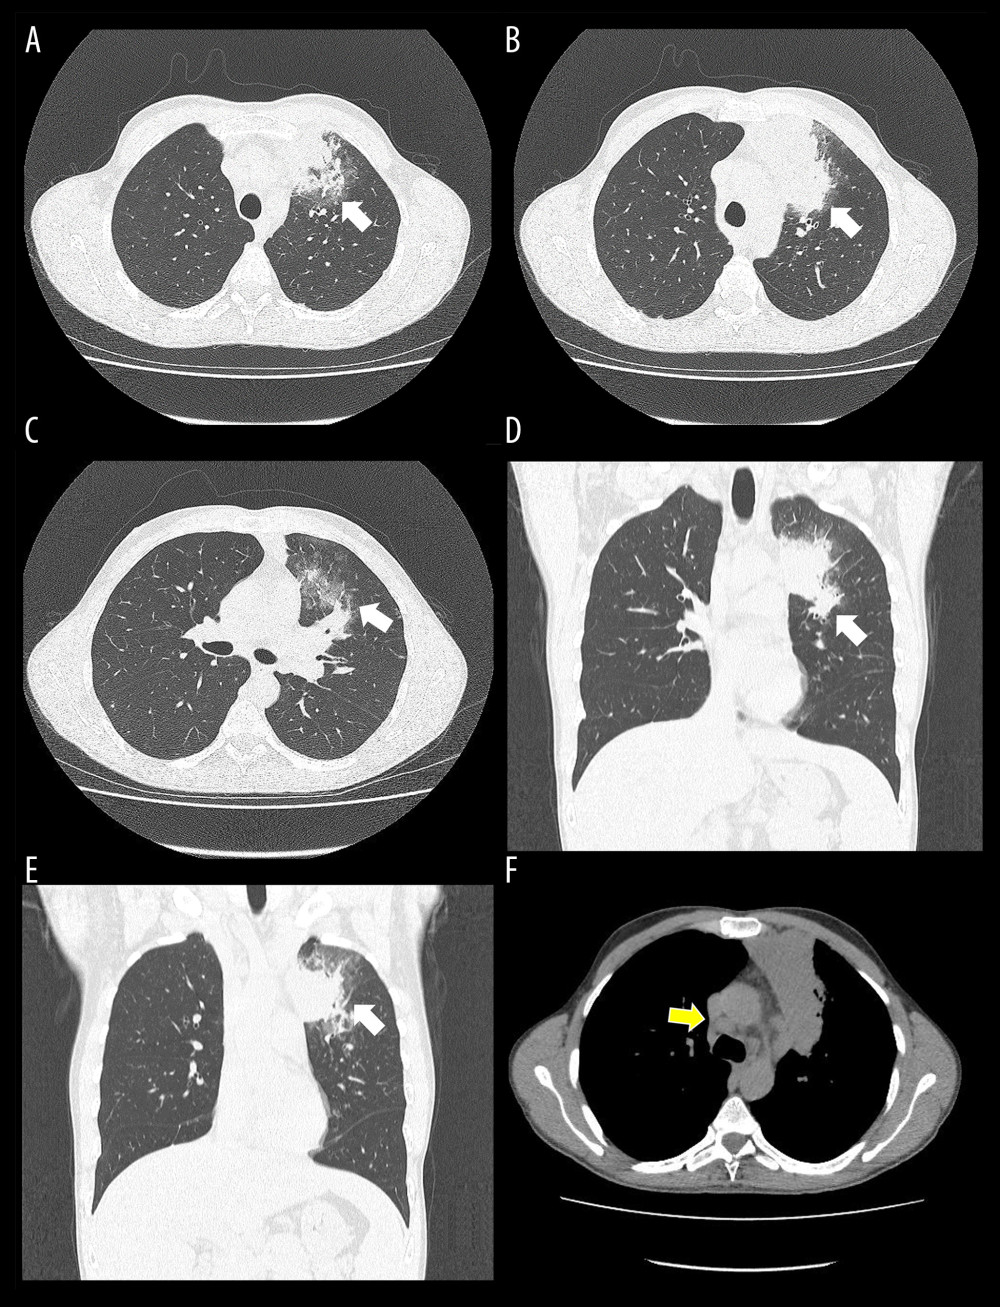 Thoracic computed tomography performed in August 2019. In the lung window, axial (A–C), and coronal slices (D, E), patchy areas of consolidation and nodules with surrounding ground-glass opacities in the medial portion of the anterior segment of the left upper lobe (white arrows) are visible. Random pulmonary micronodules are visible in the lung window (A–E), and lymphadenopathy (yellow arrow) is seen in the axial slide of the mediastinal window (F). These findings are consistent with a pulmonary infection.